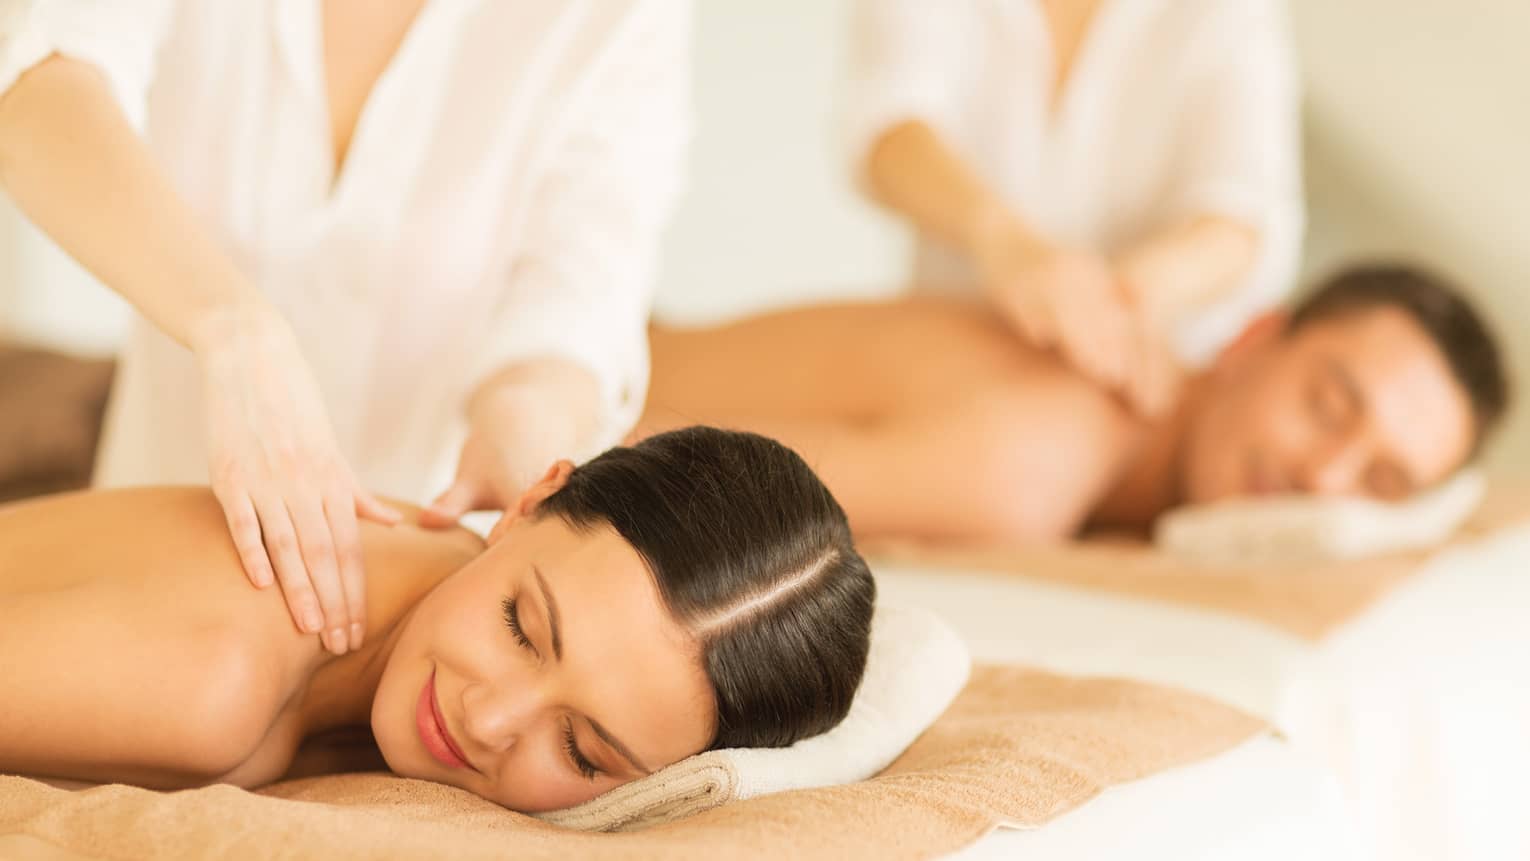 Woman and man lie side-by-side on massage tables as spa staff massage their bare shoulders